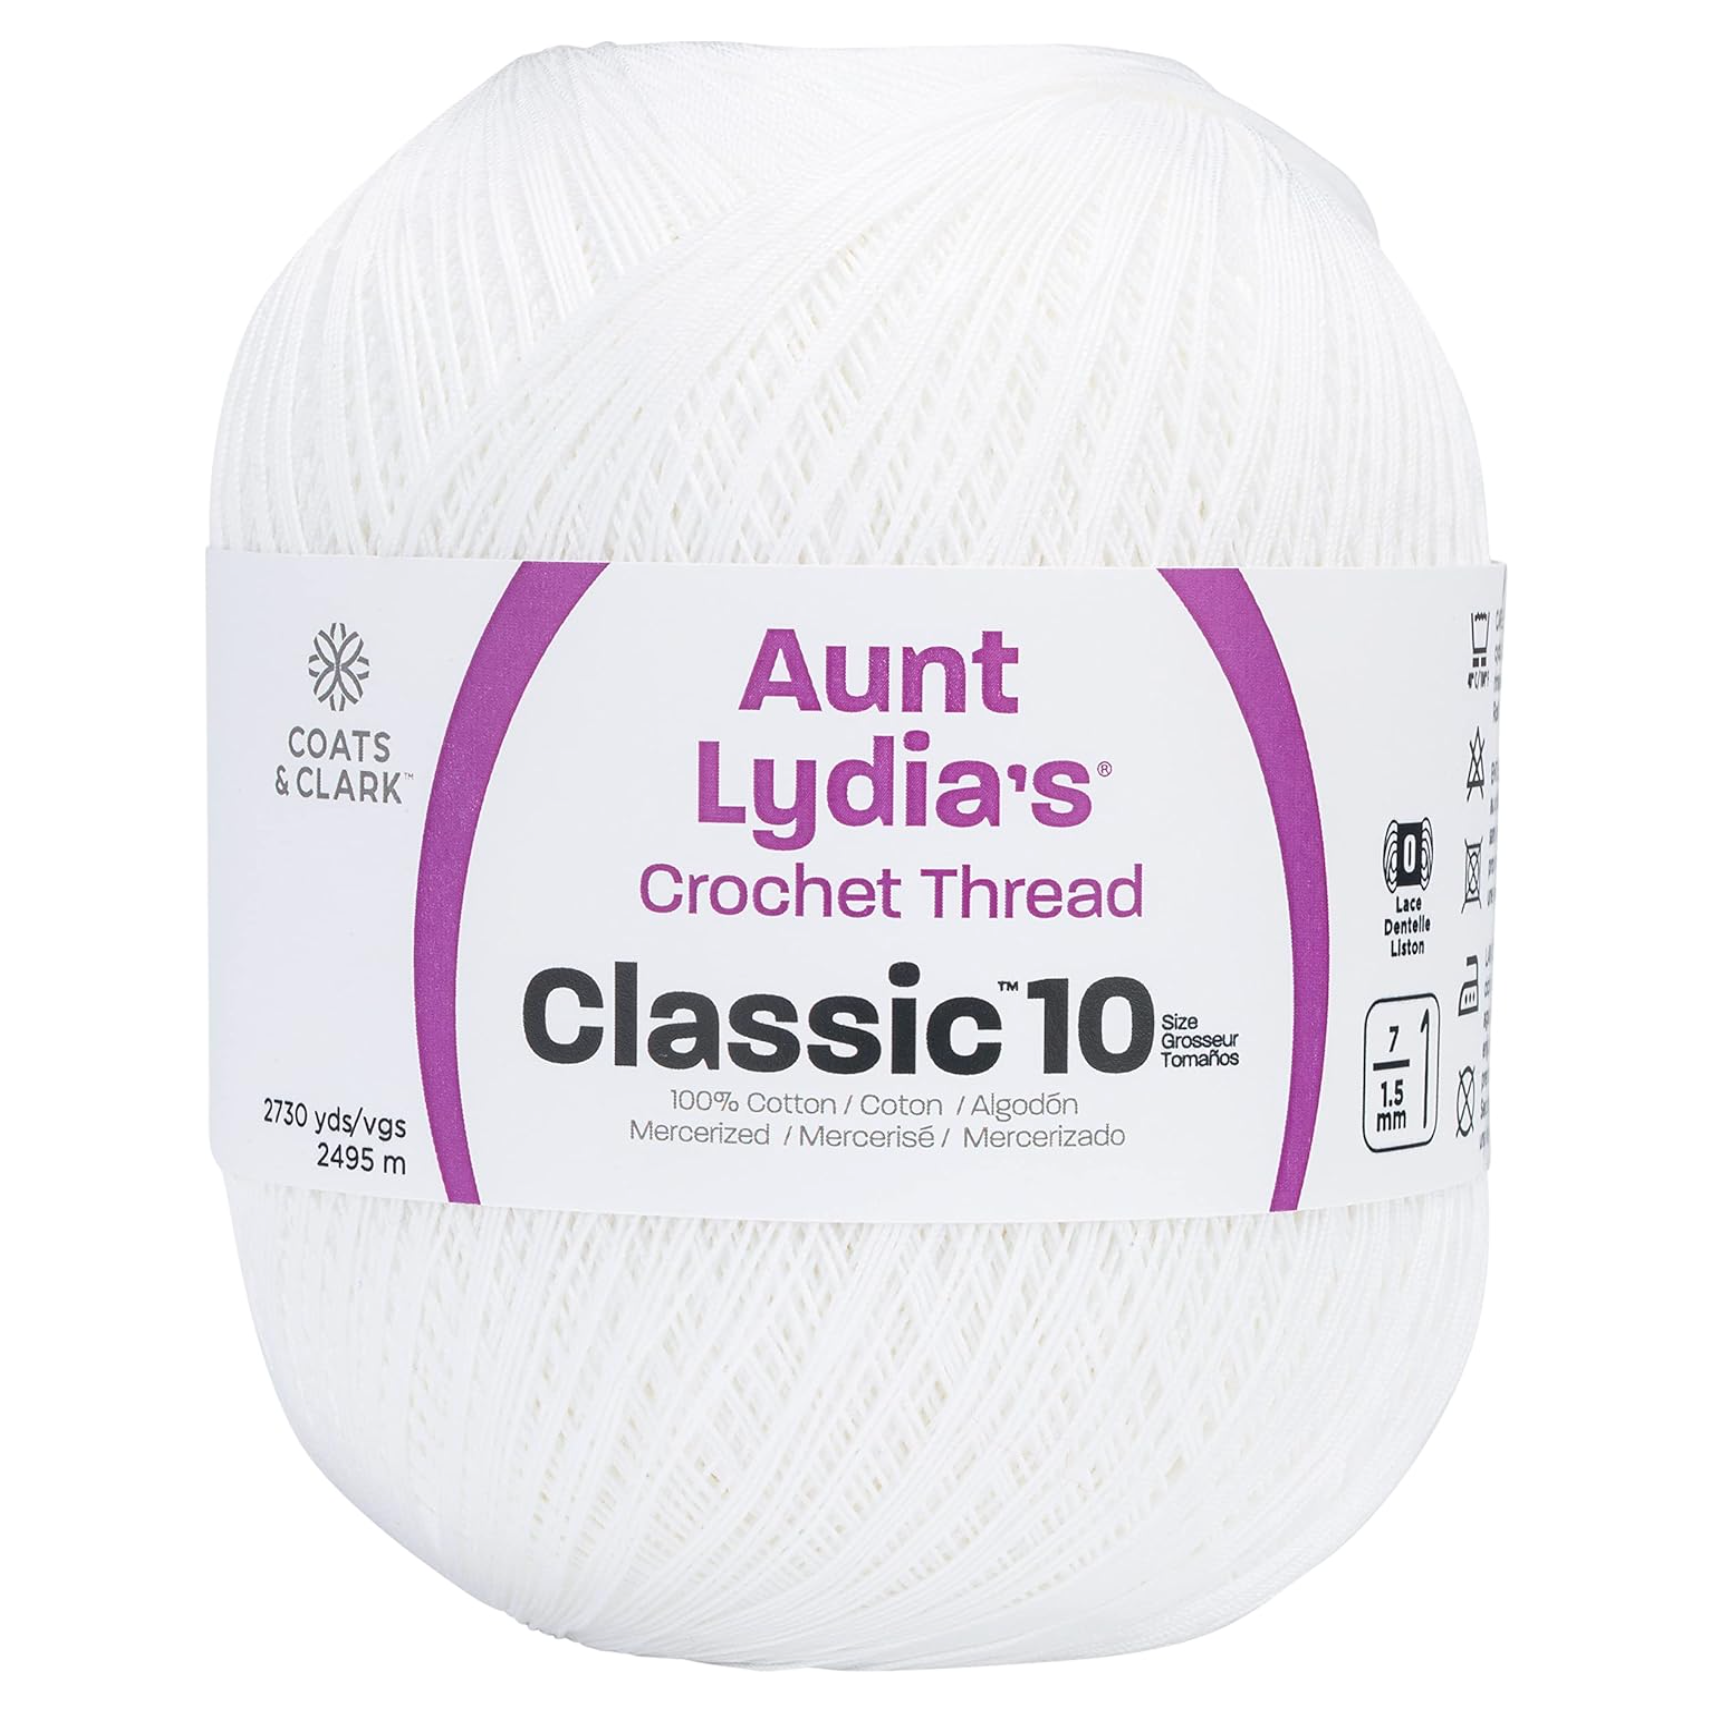 Aunt Lydia's Classic Crochet Thread Size 10 Jumbo Sold As A 2 Pack